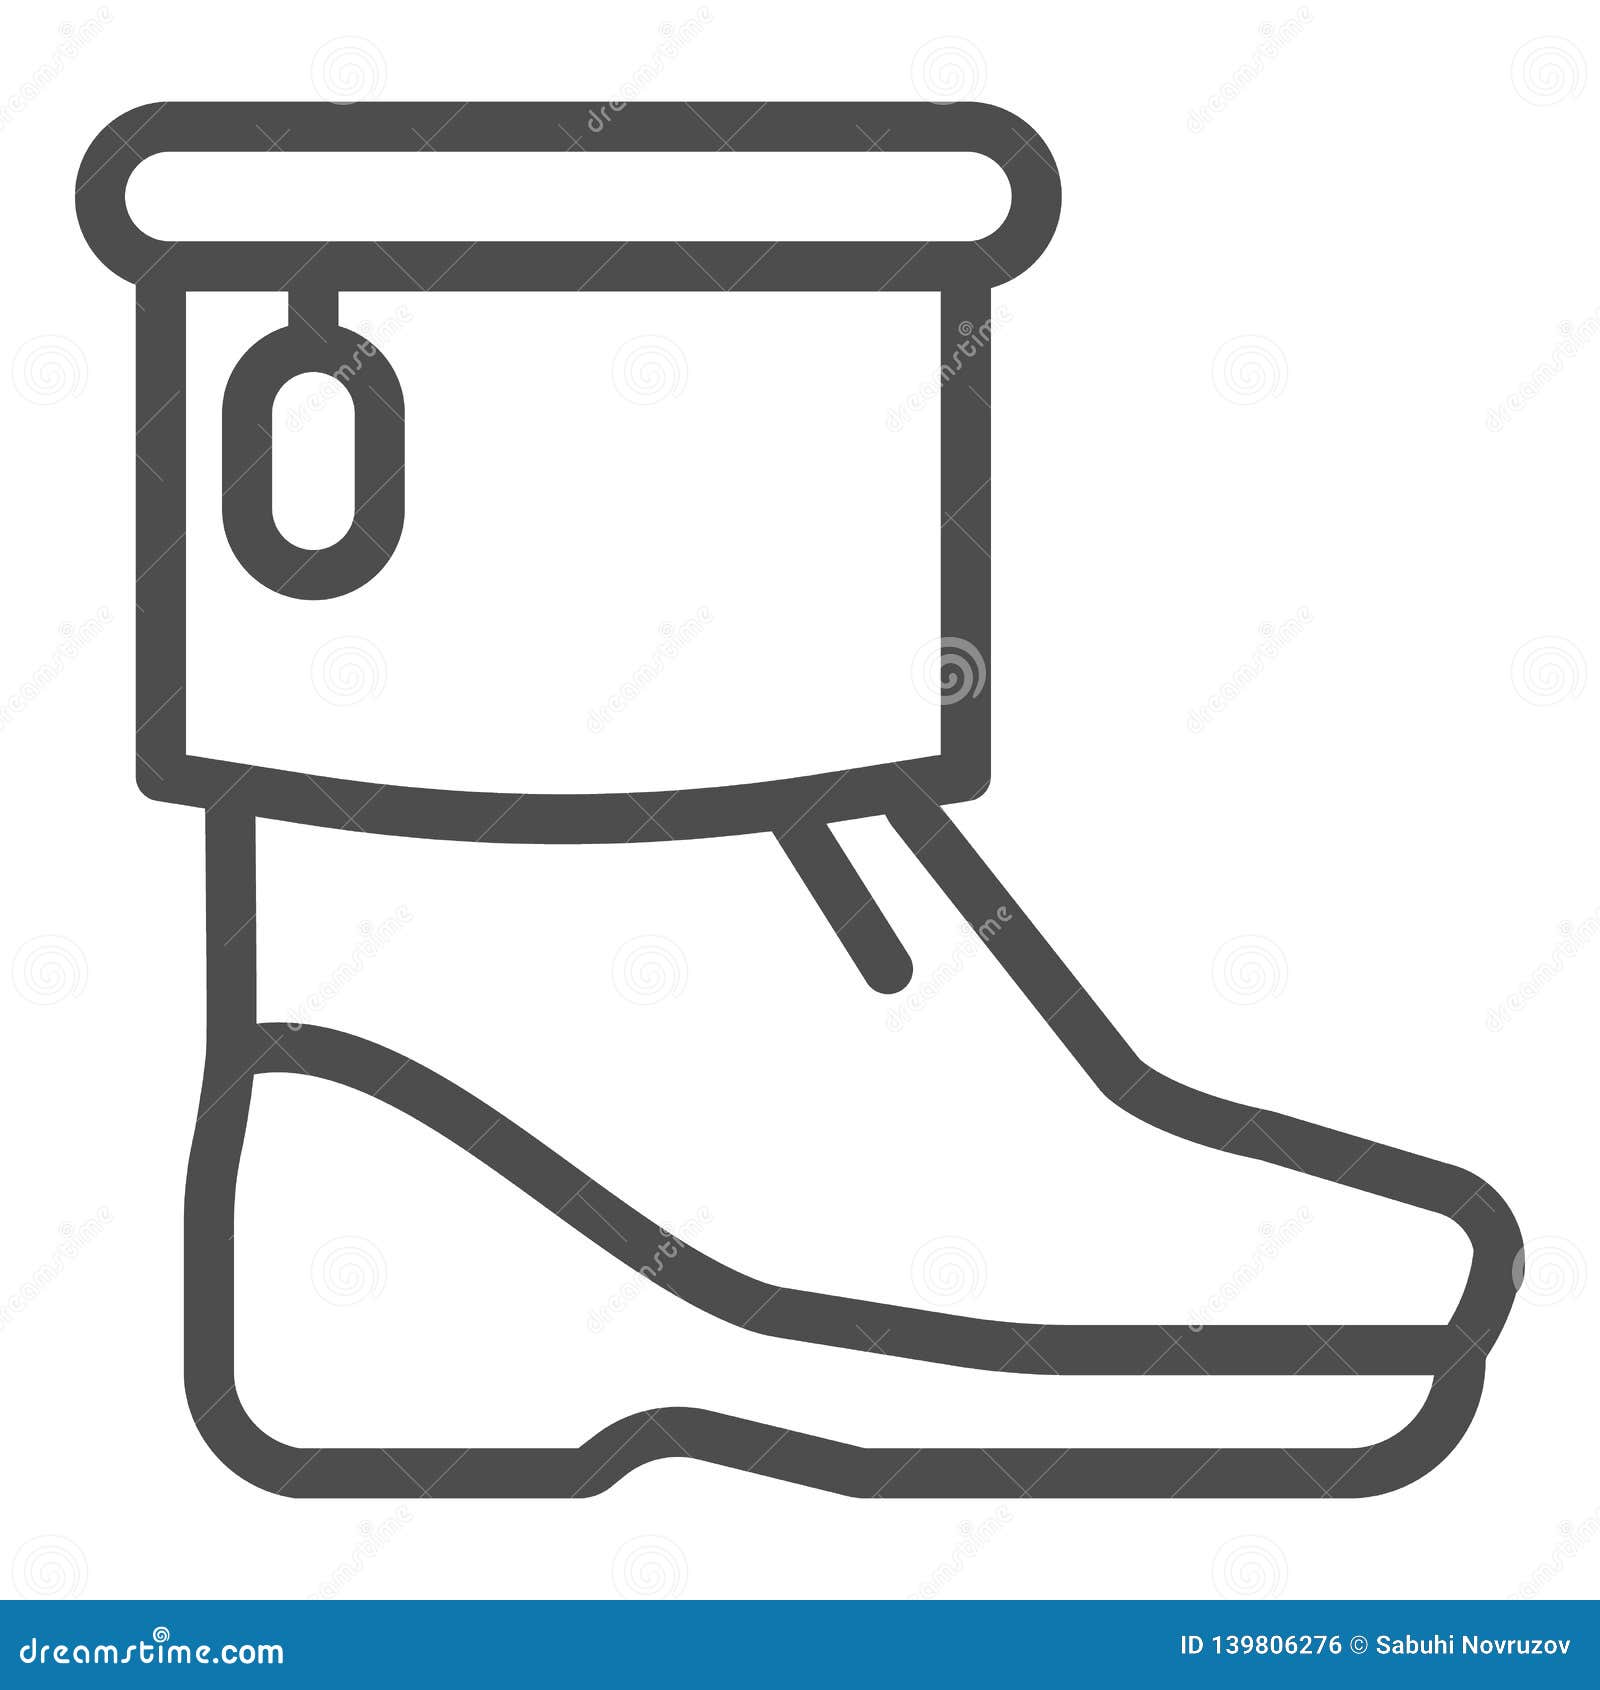 Winter Boots Line Icon. Woman Boots Vector Illustration Isolated on ...